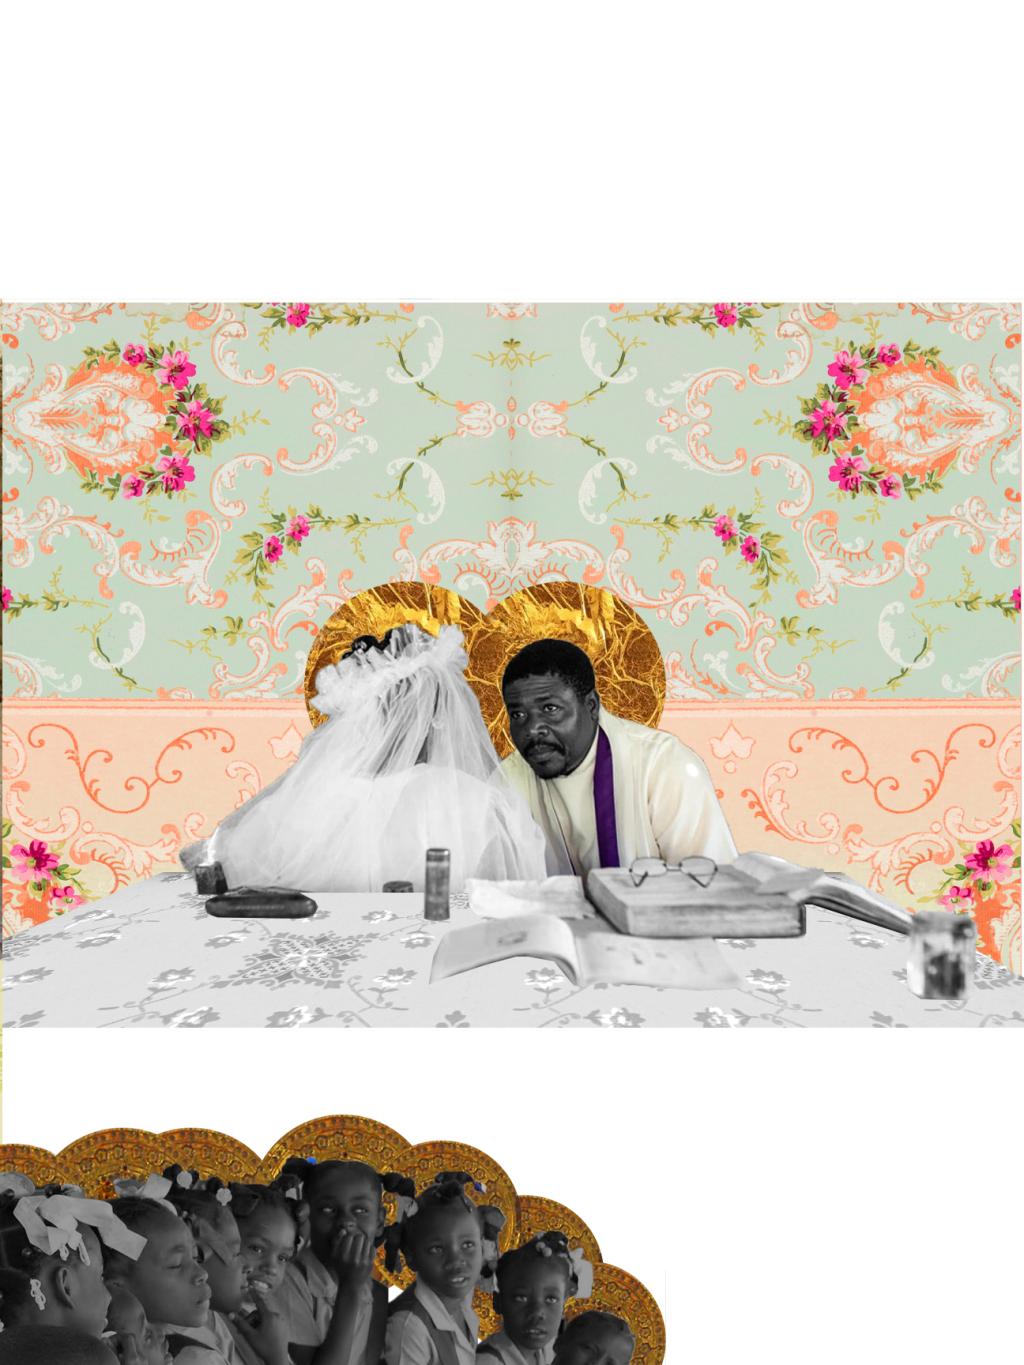 A black couple in wedding attire, with abstract images around them. A group of black school girls is below them.